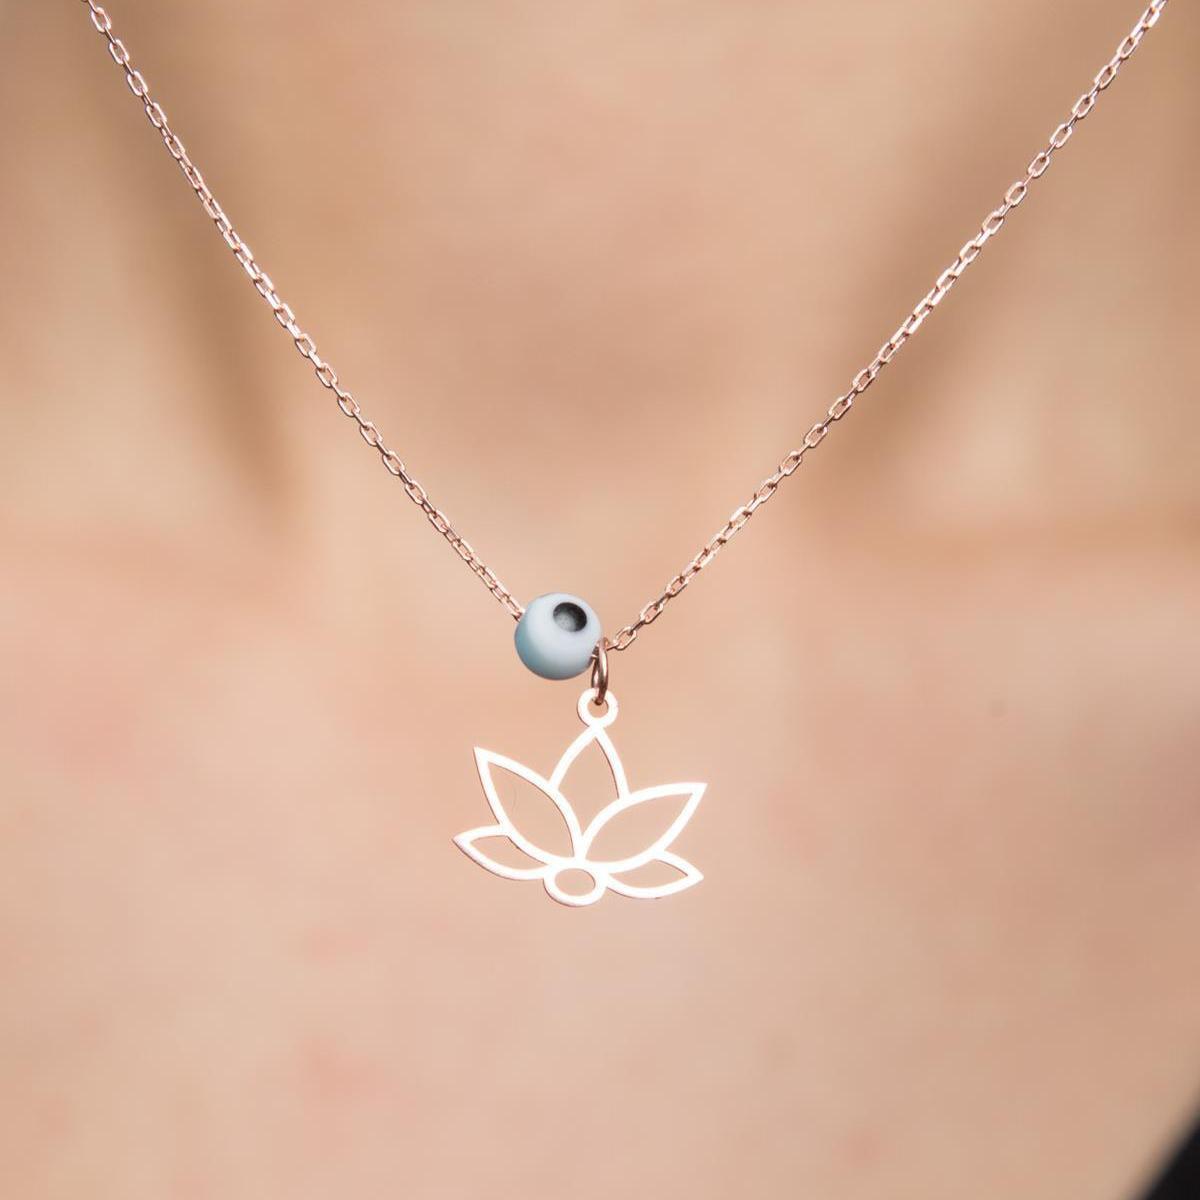 Evil Eye Protection Necklace • Evil Eye Lotus Flower Necklace - Trending Silver Gifts